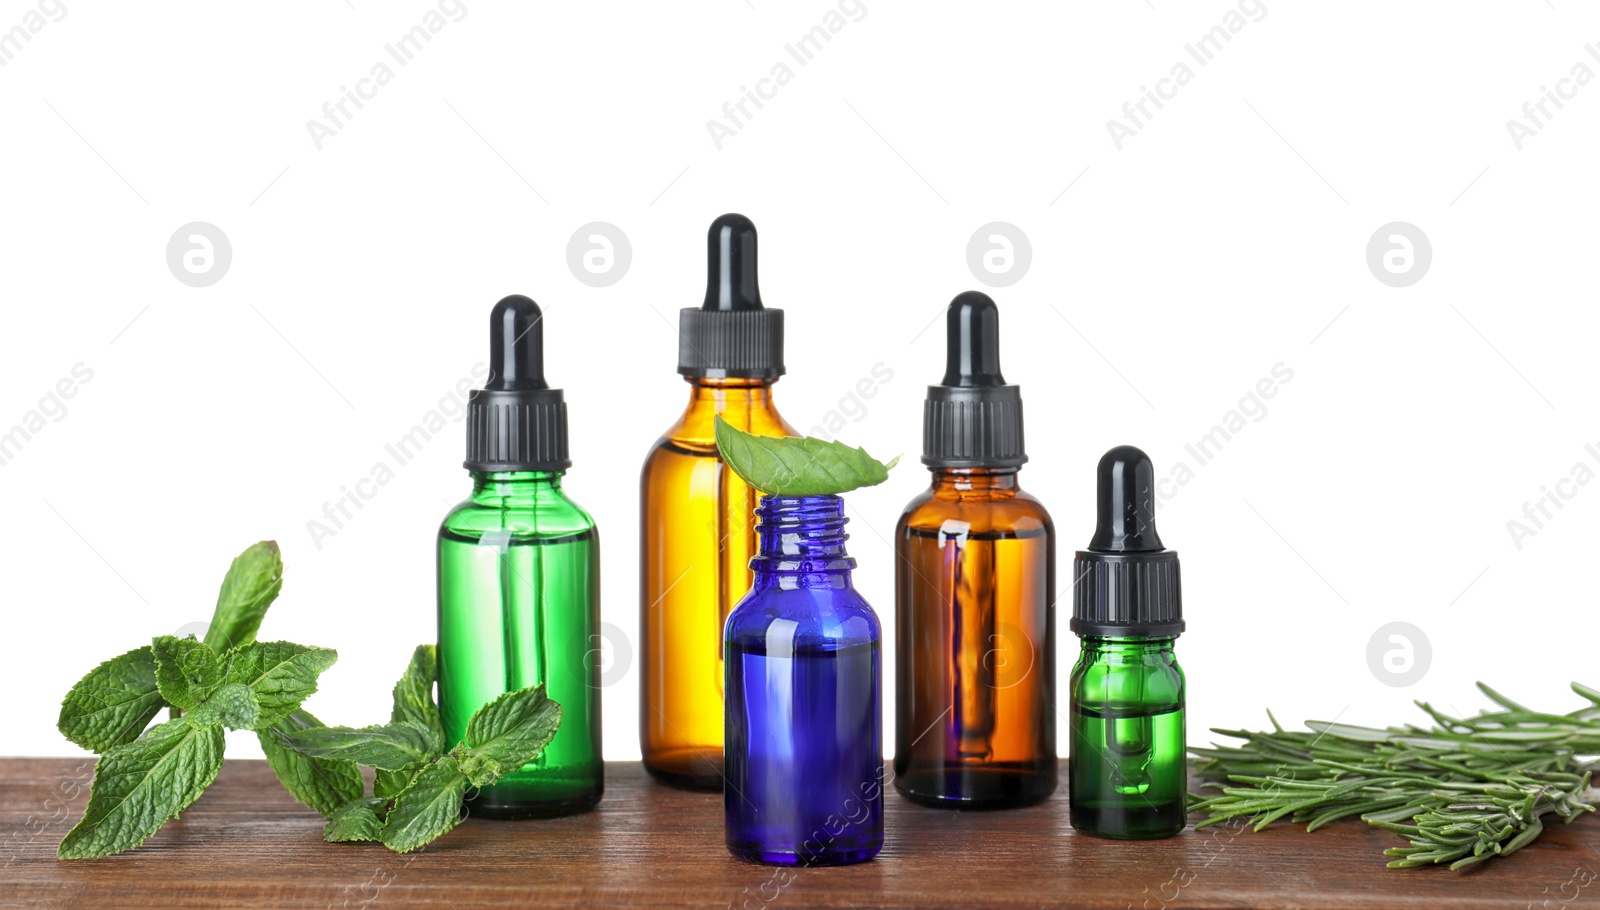 Photo of Bottles of herbal essential oils on wooden table against white background